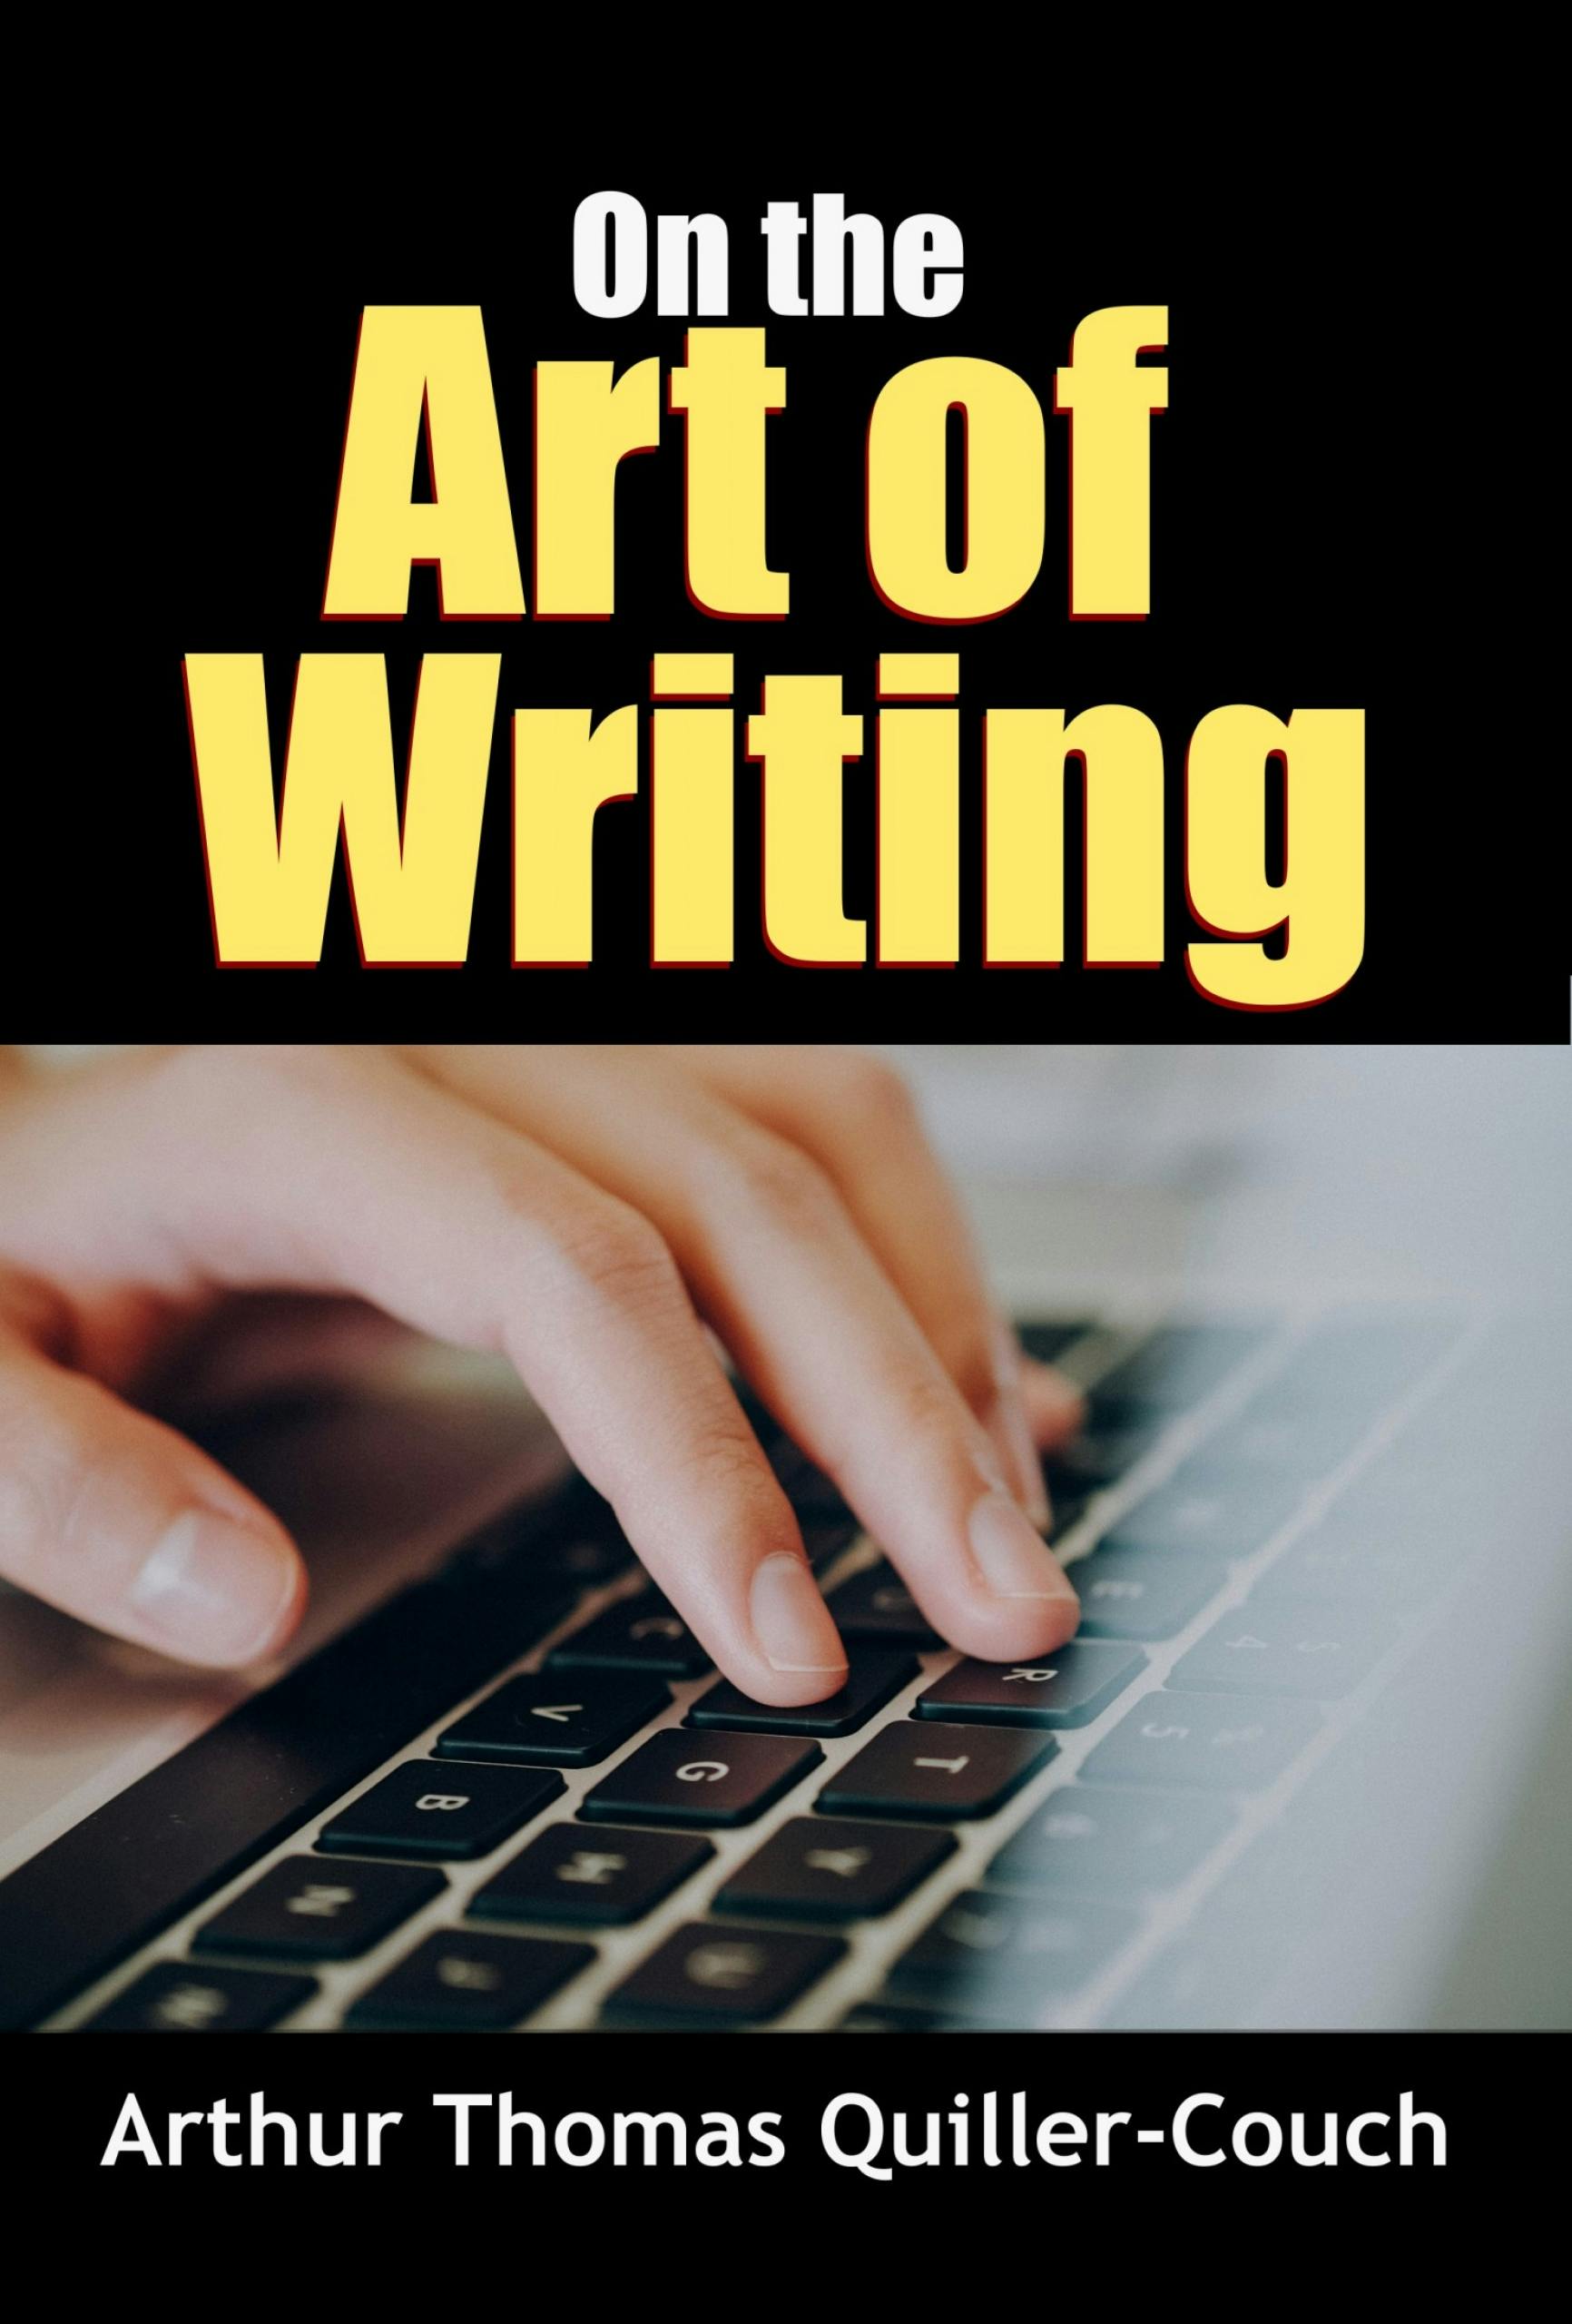 On the Art of Writing - Arthur Thomas Quiller-Couch